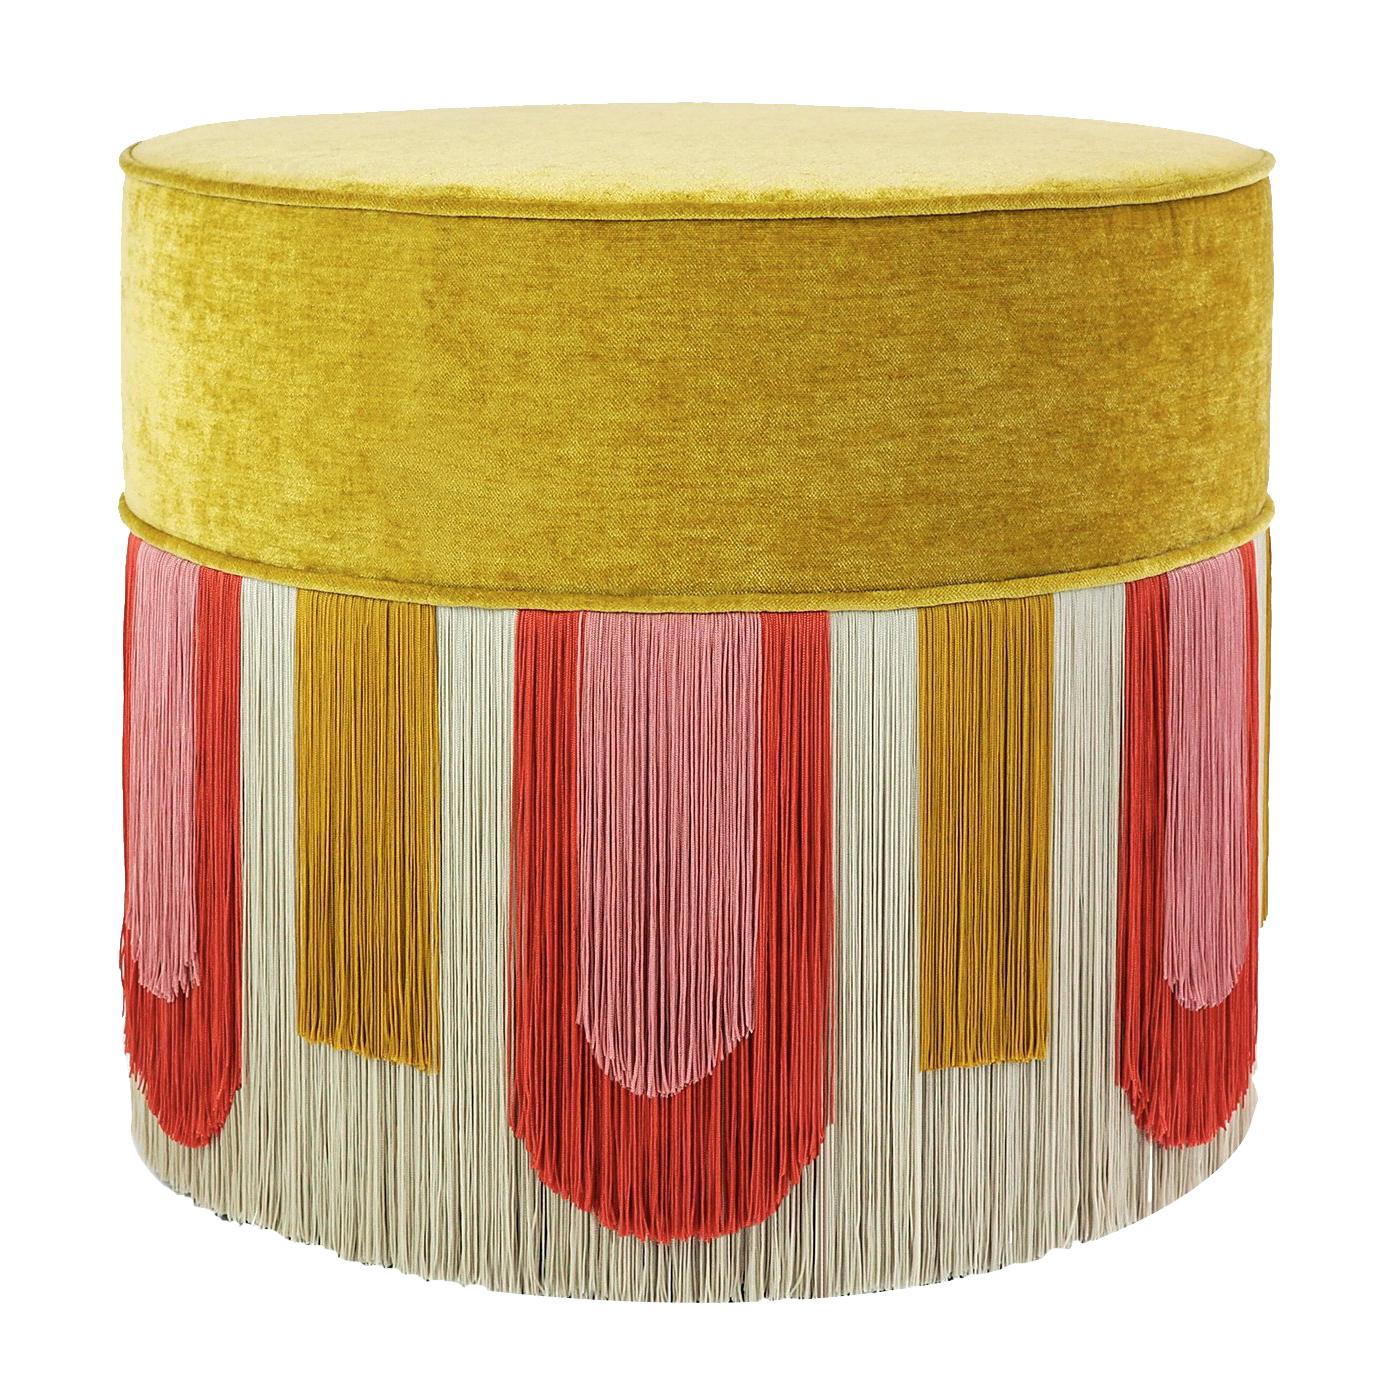 Couture Geometric Deco Yellow Pouf For Sale